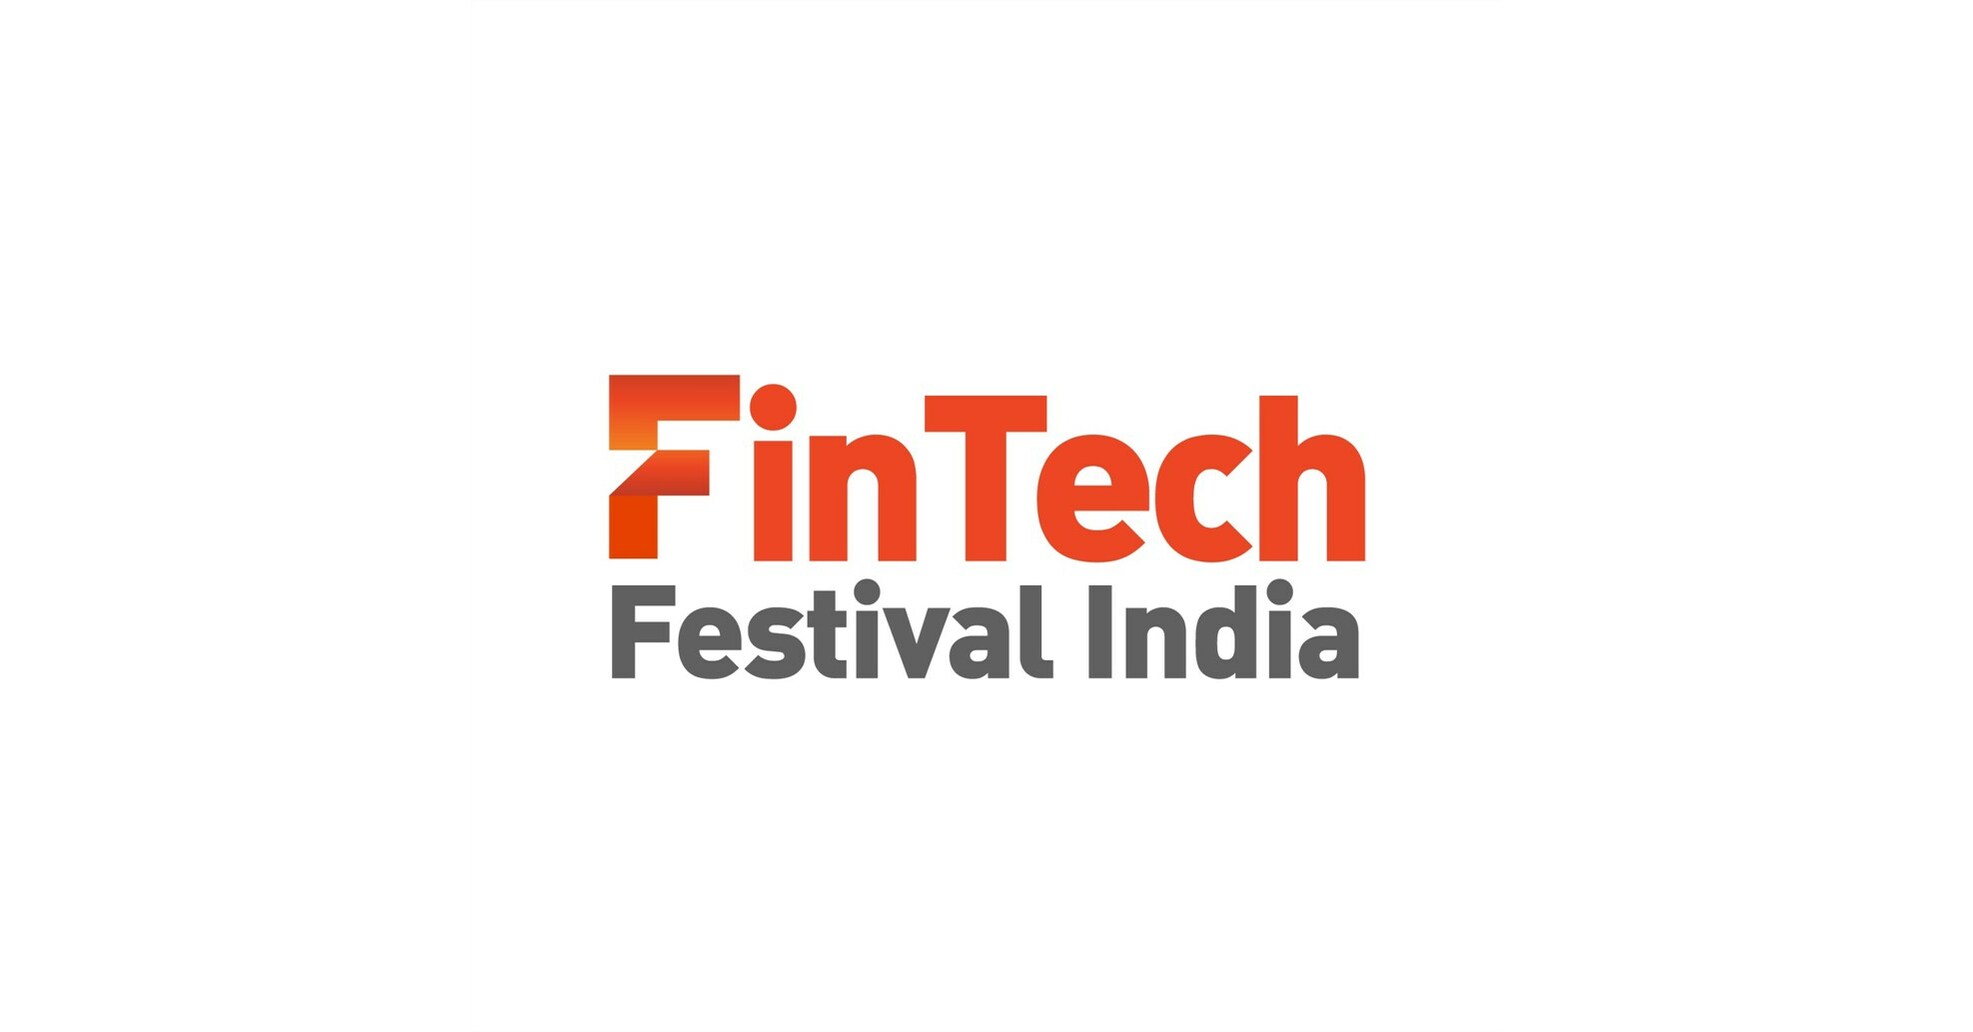 Second edition of FinTech Festival India to bring together the global FinTech community from 16